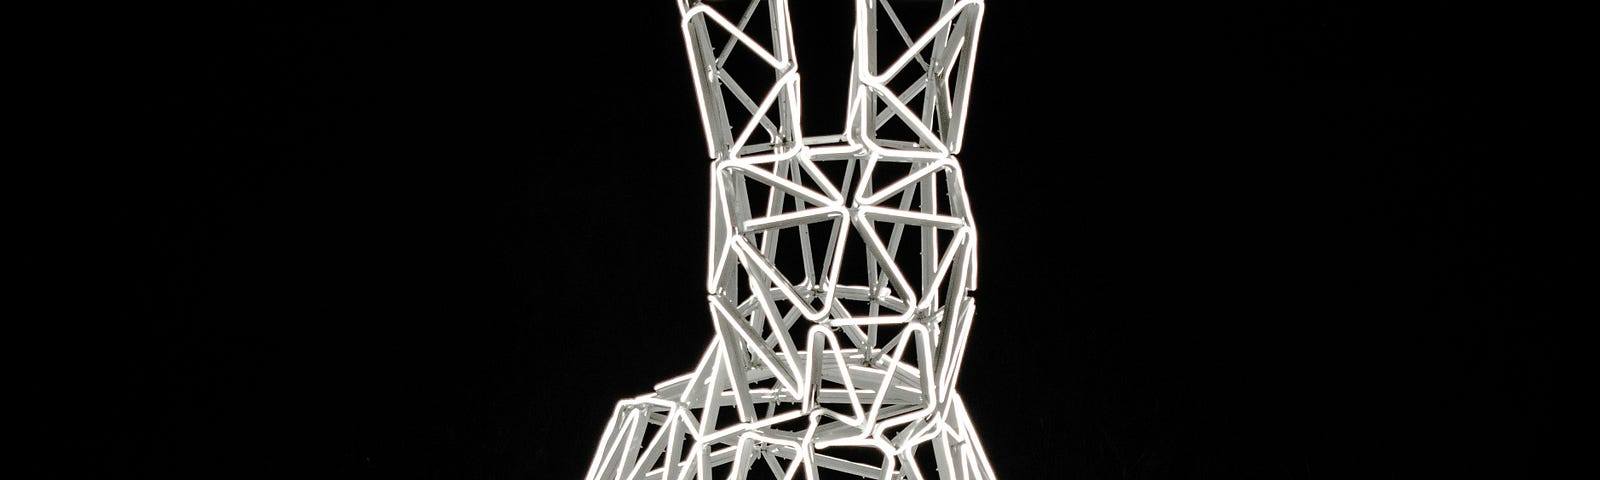 Grid-like sculpture of a white rabbit shining in a dark place.